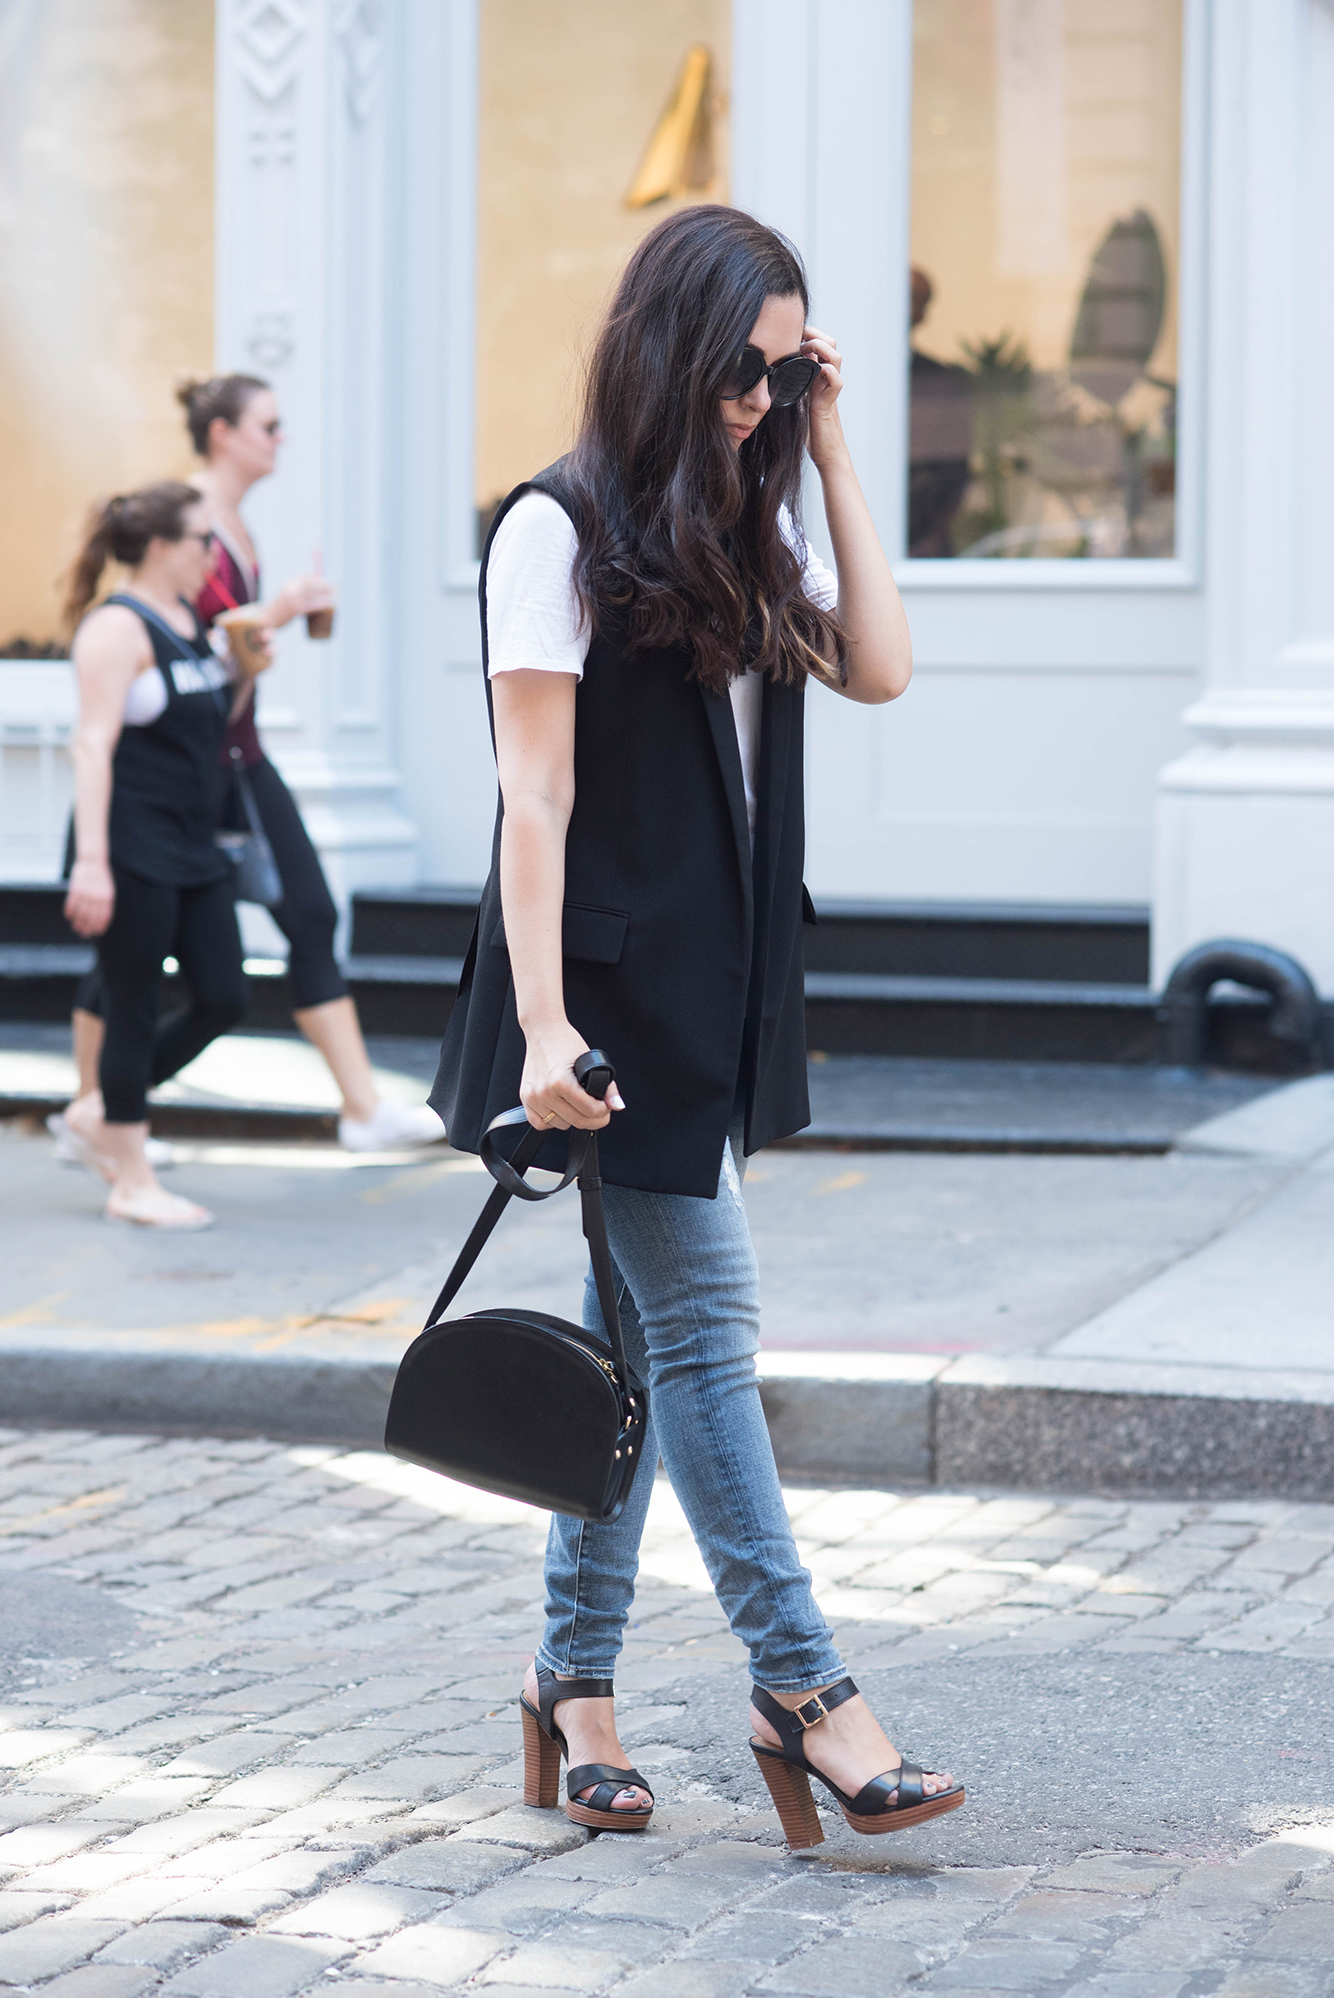 coco-and-vera-top-vancouver-style-blog-top-canadian-style-blog-top-blogger-street-style-zara-vest-aritzia-tee-lovers-and-friends-jeans-apc-bag-le-chateau-sandals-nyc-streetstyle